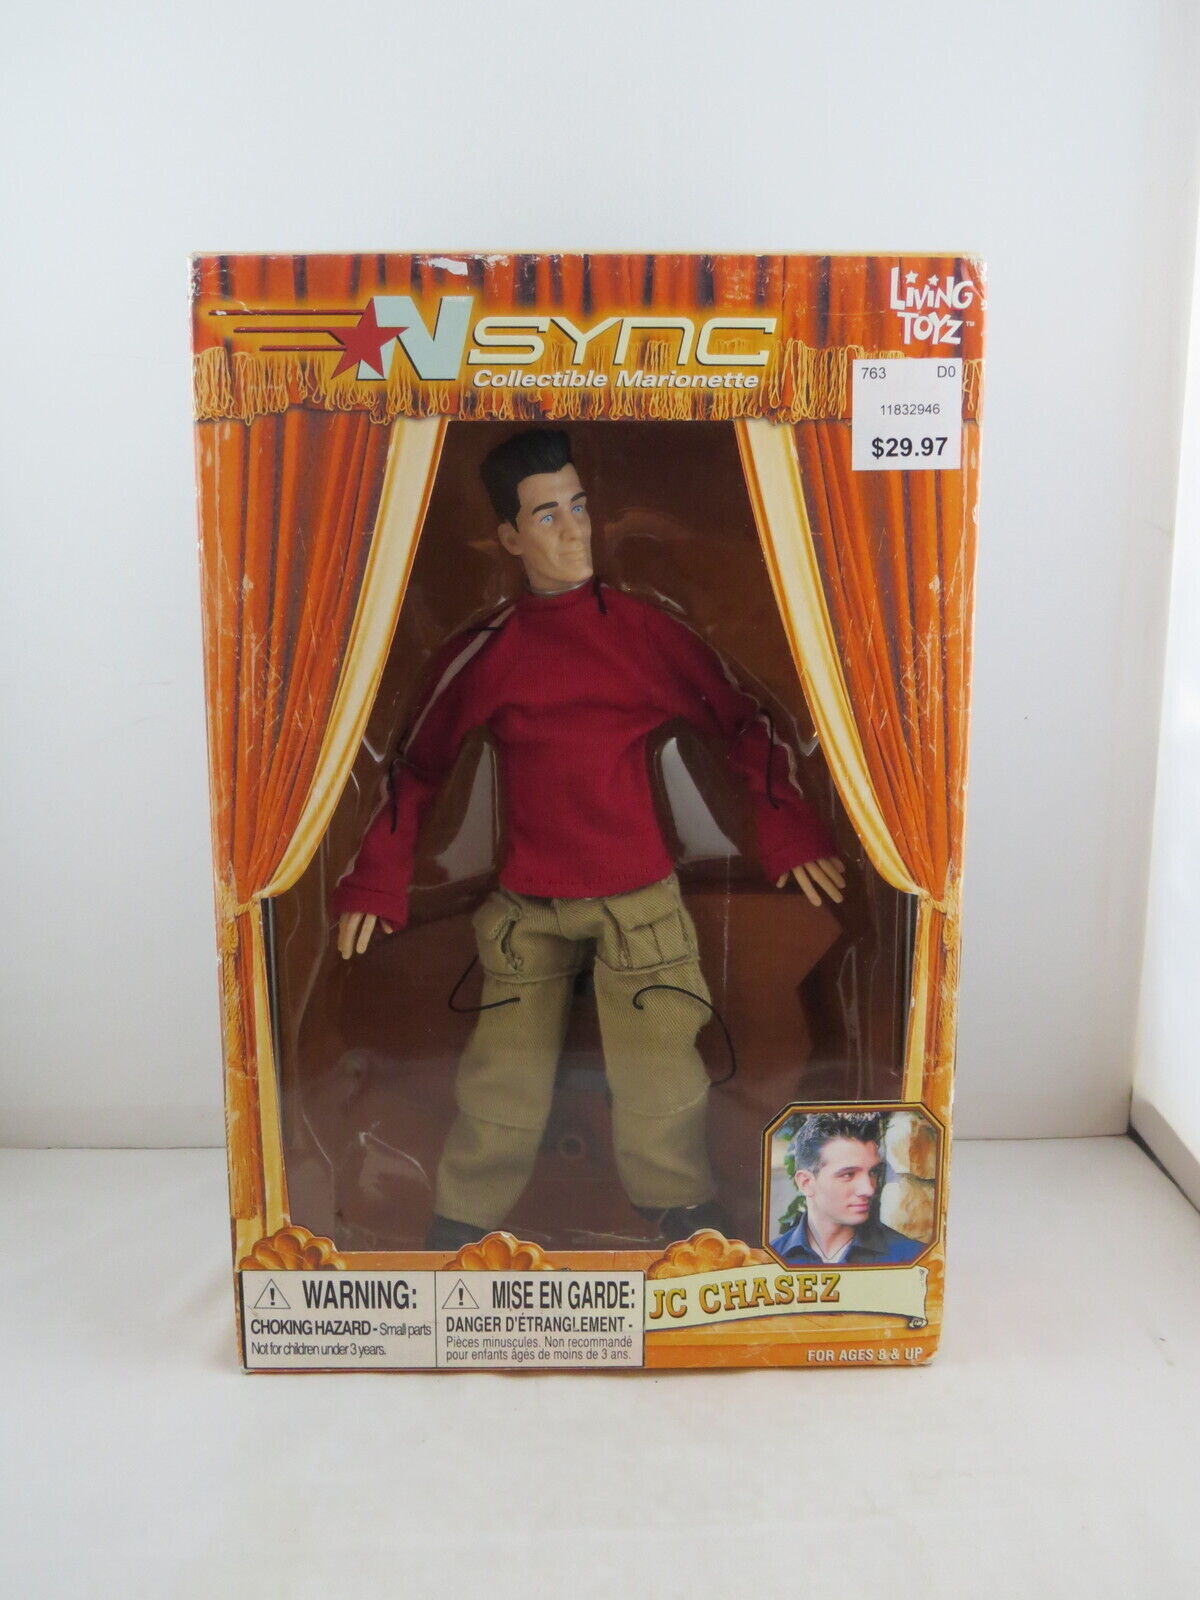 Nsync  Marionette Dolls - 2000 Jc Chasez Figurine - New In Package